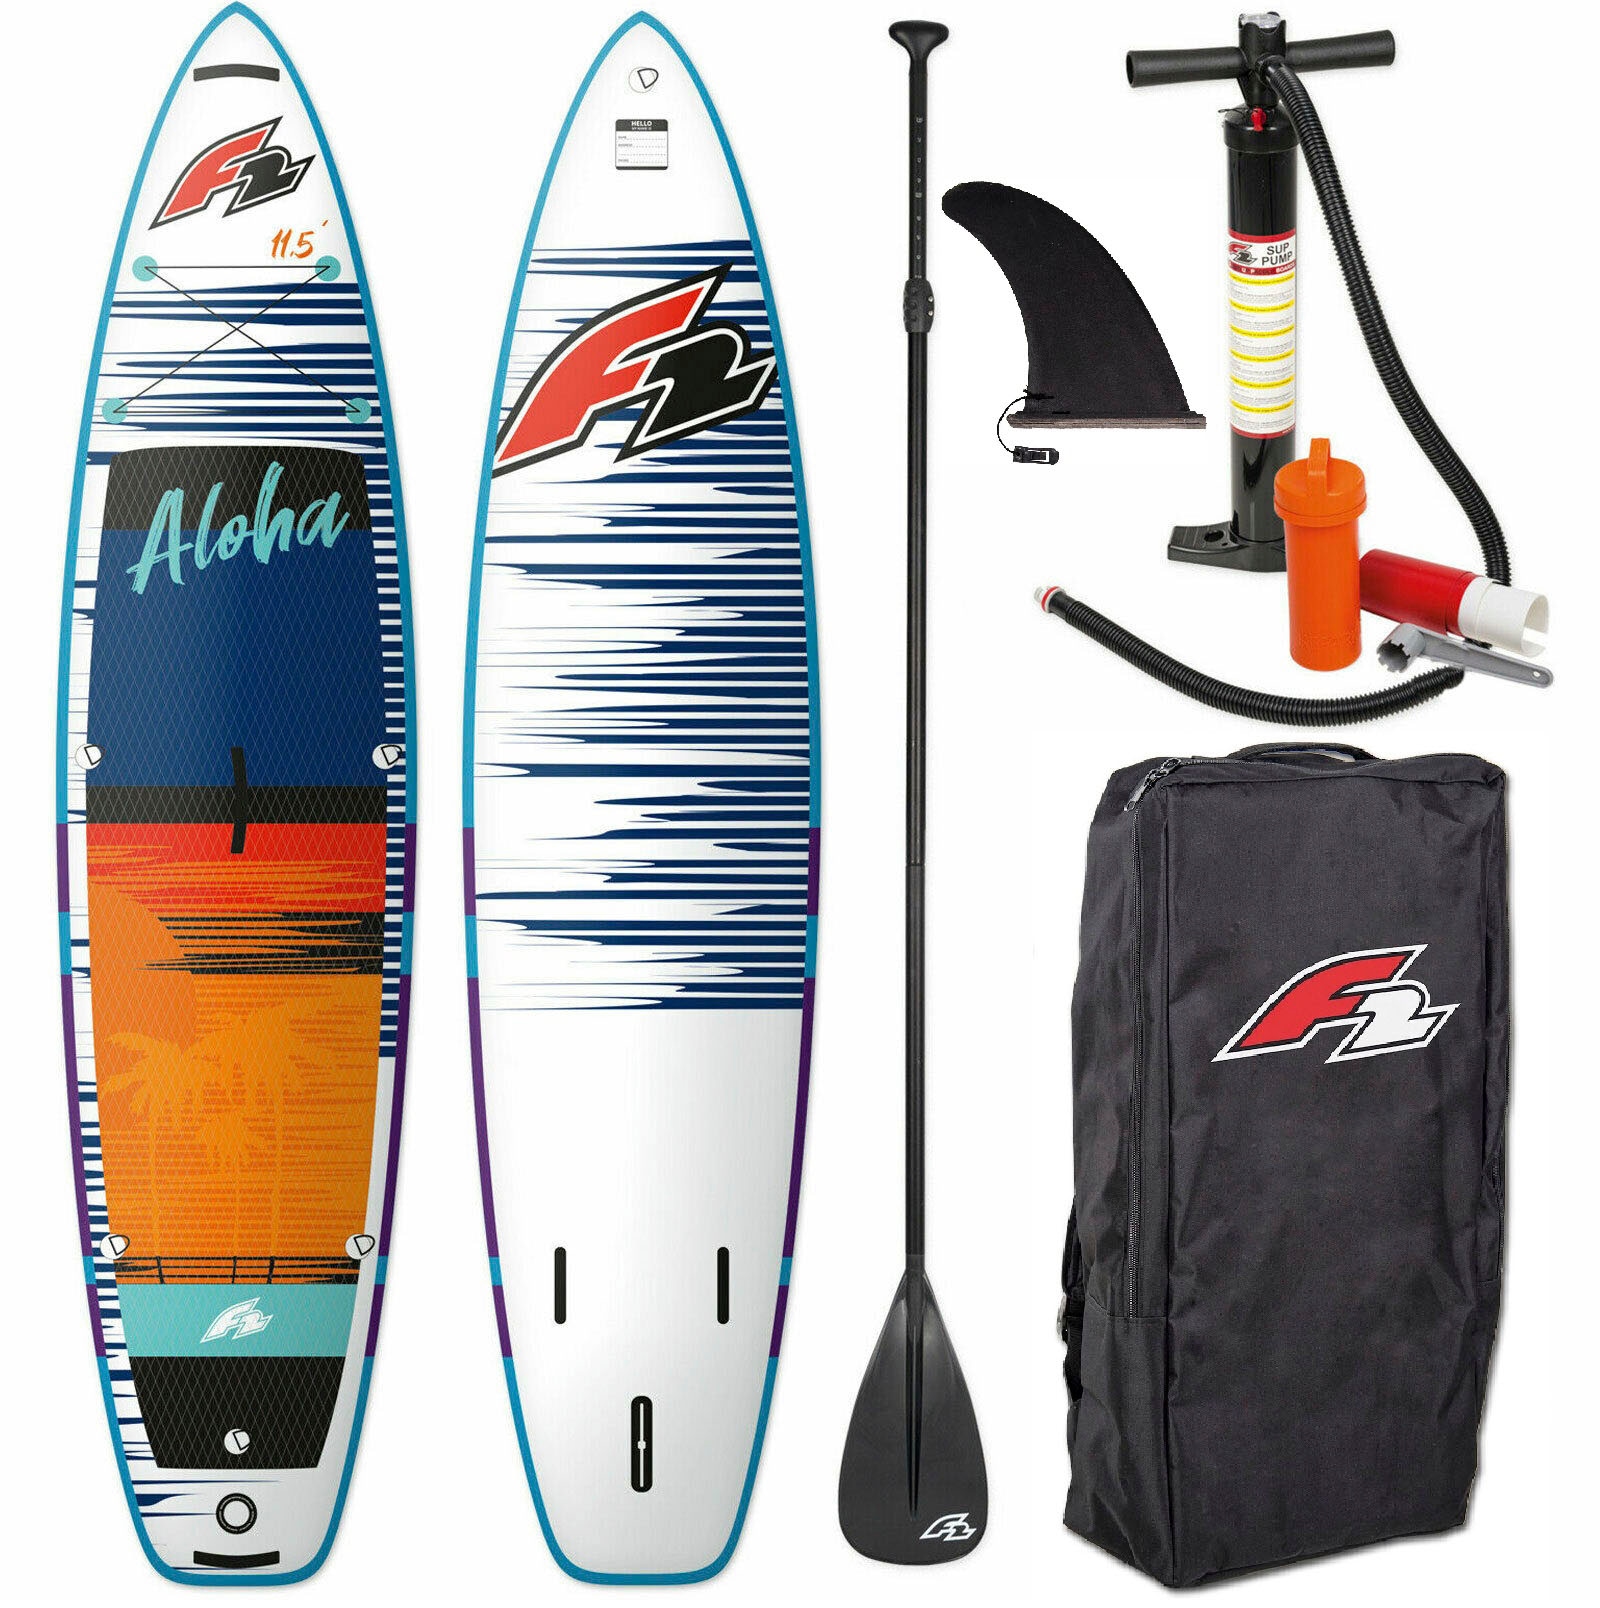 OTTO 5 Inflatable (Packung, 11,4 red«, SUP-Board Shop kaufen »Aloha tlg.) im F2 Online